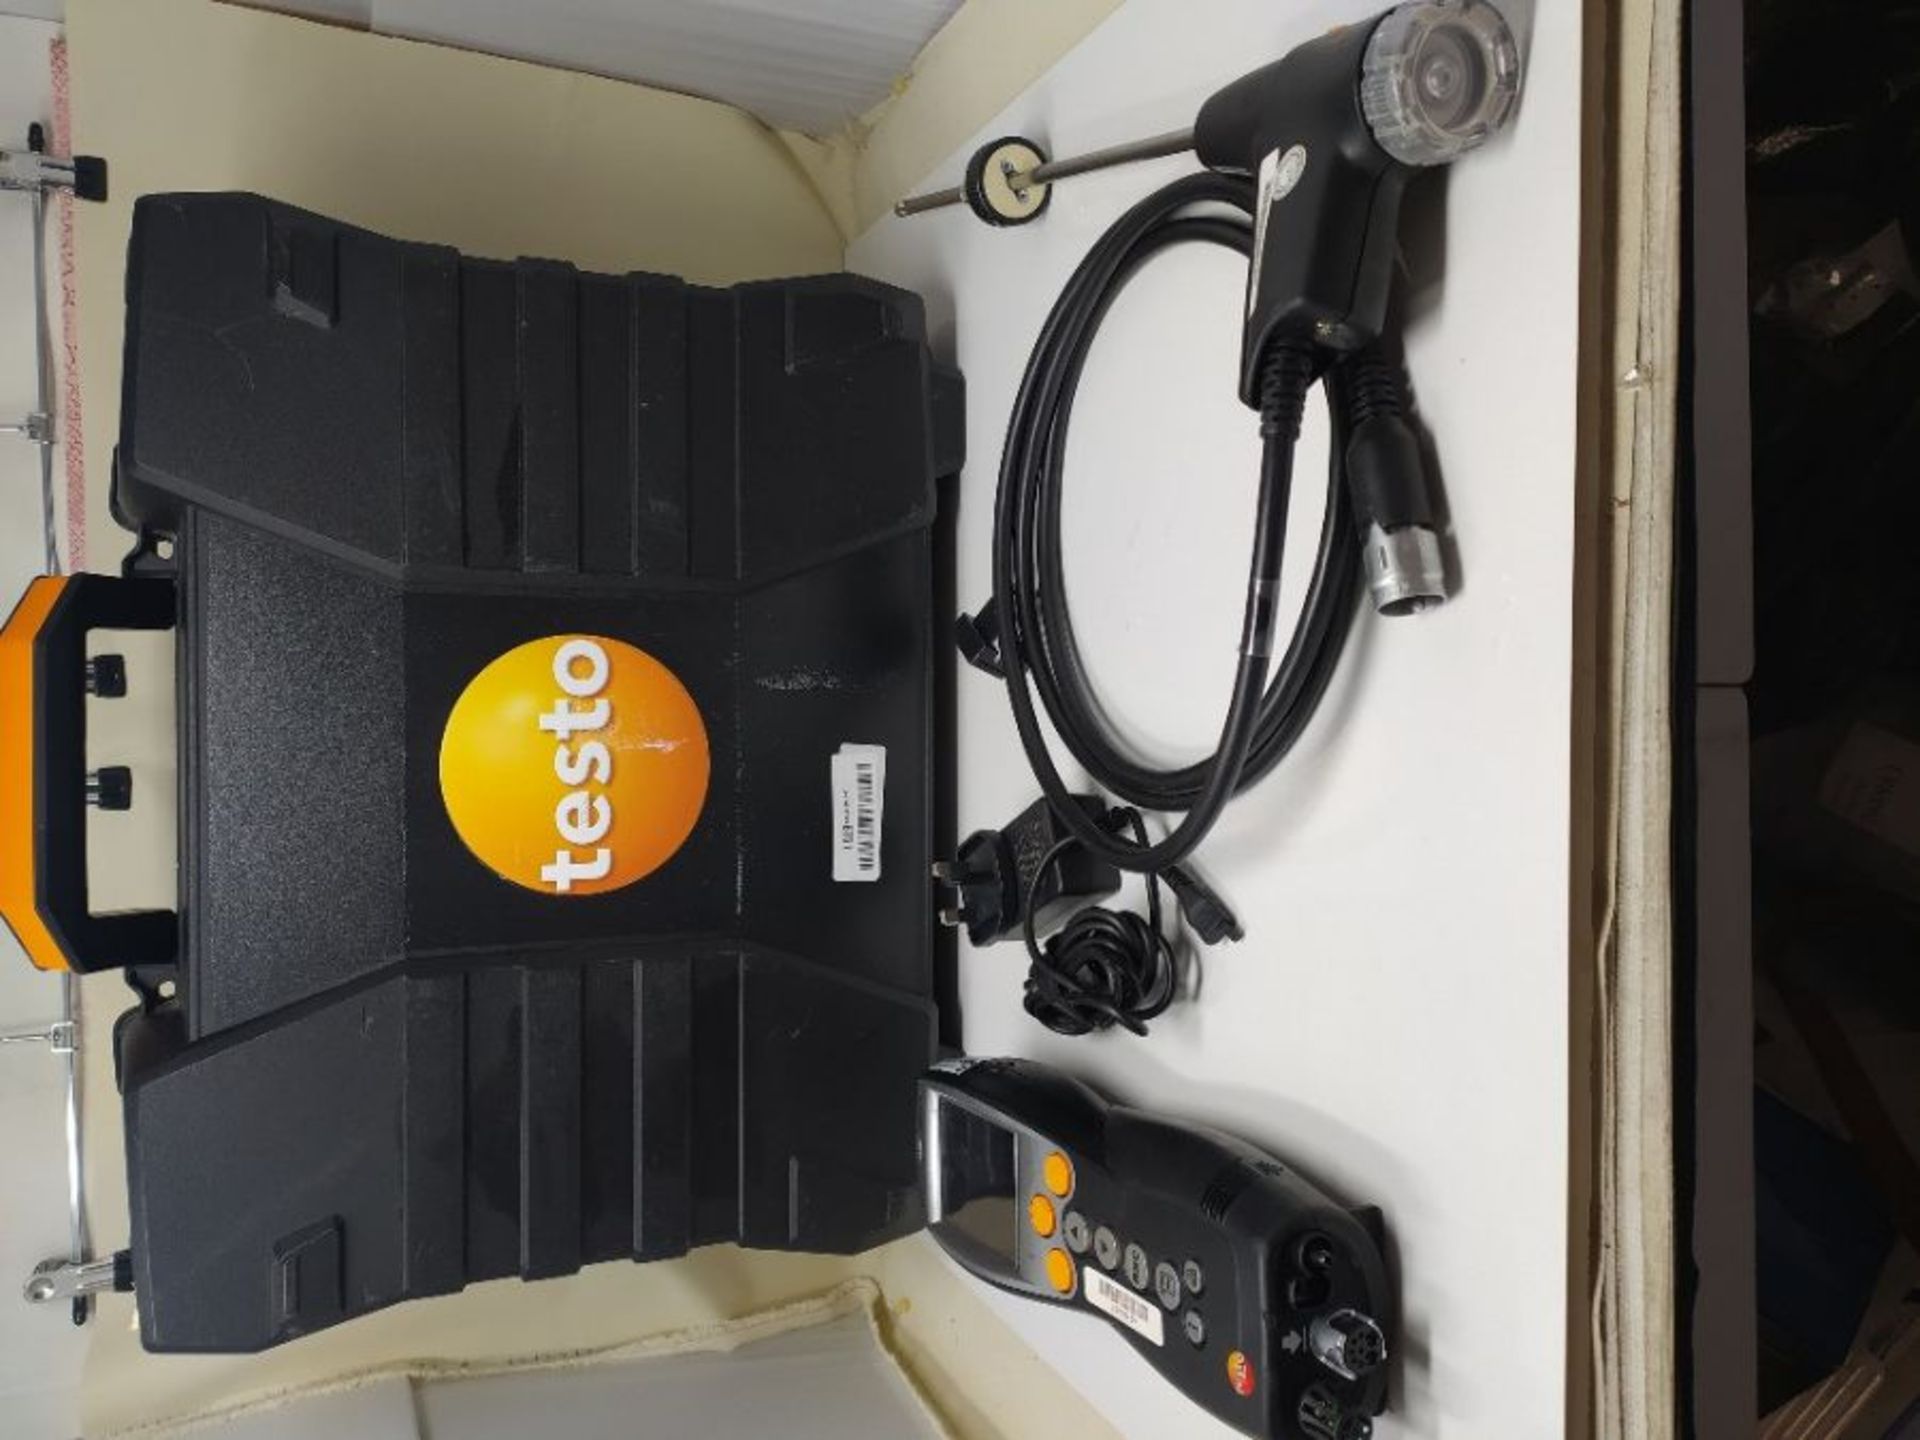 RRP £1766.00 testo 330-2 LL - Flue Gas Analyser (Pro set with Bluetooth) - Image 2 of 3